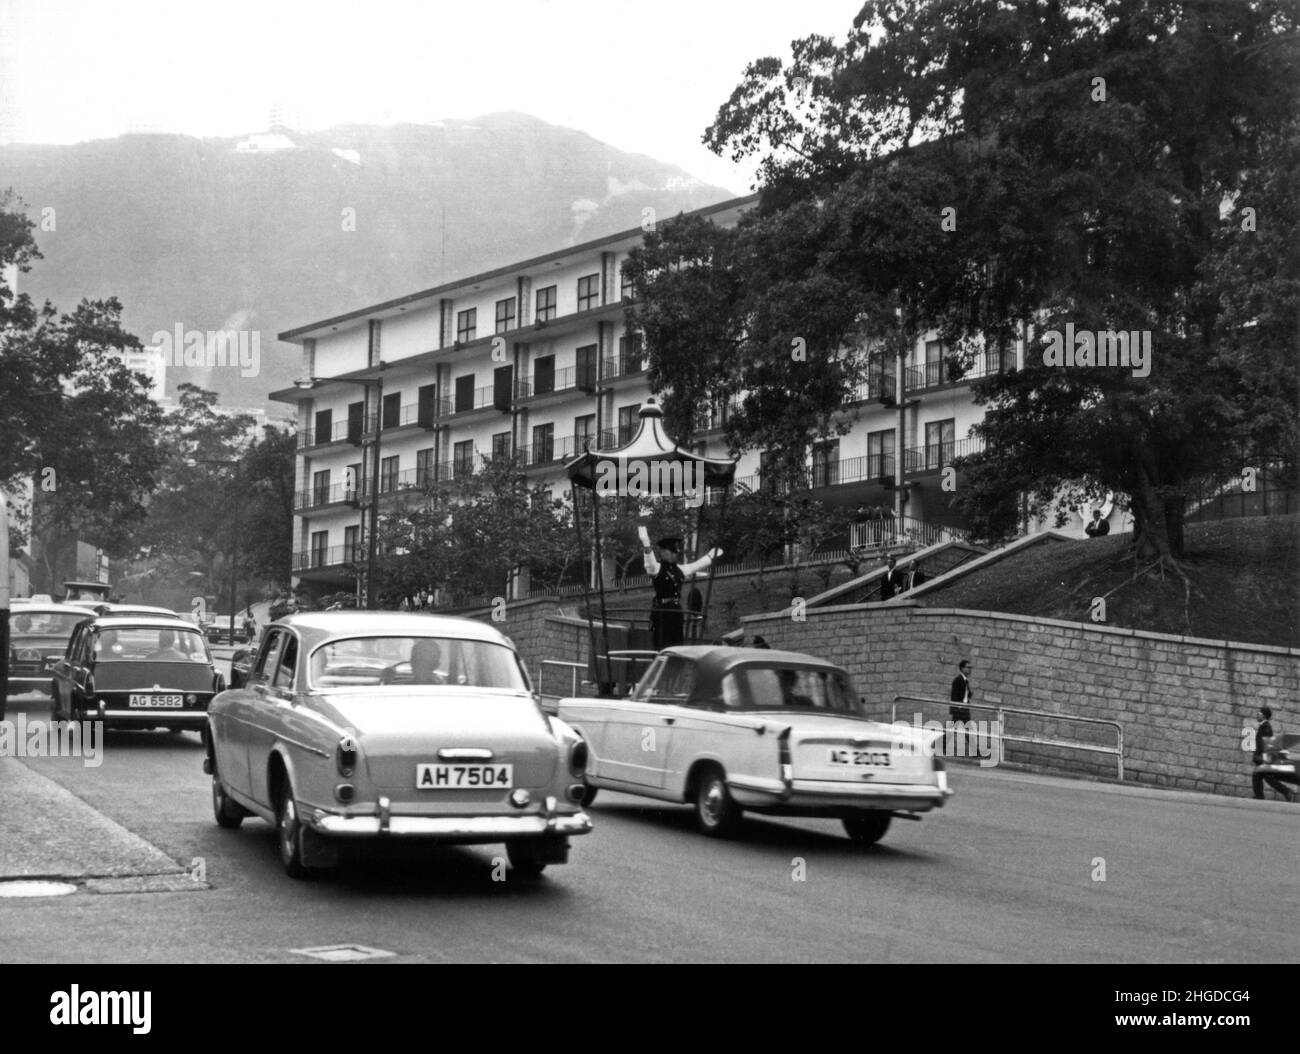 Hong Kong island towards the Peak with traffic control police and cars 1967 Stock Photo